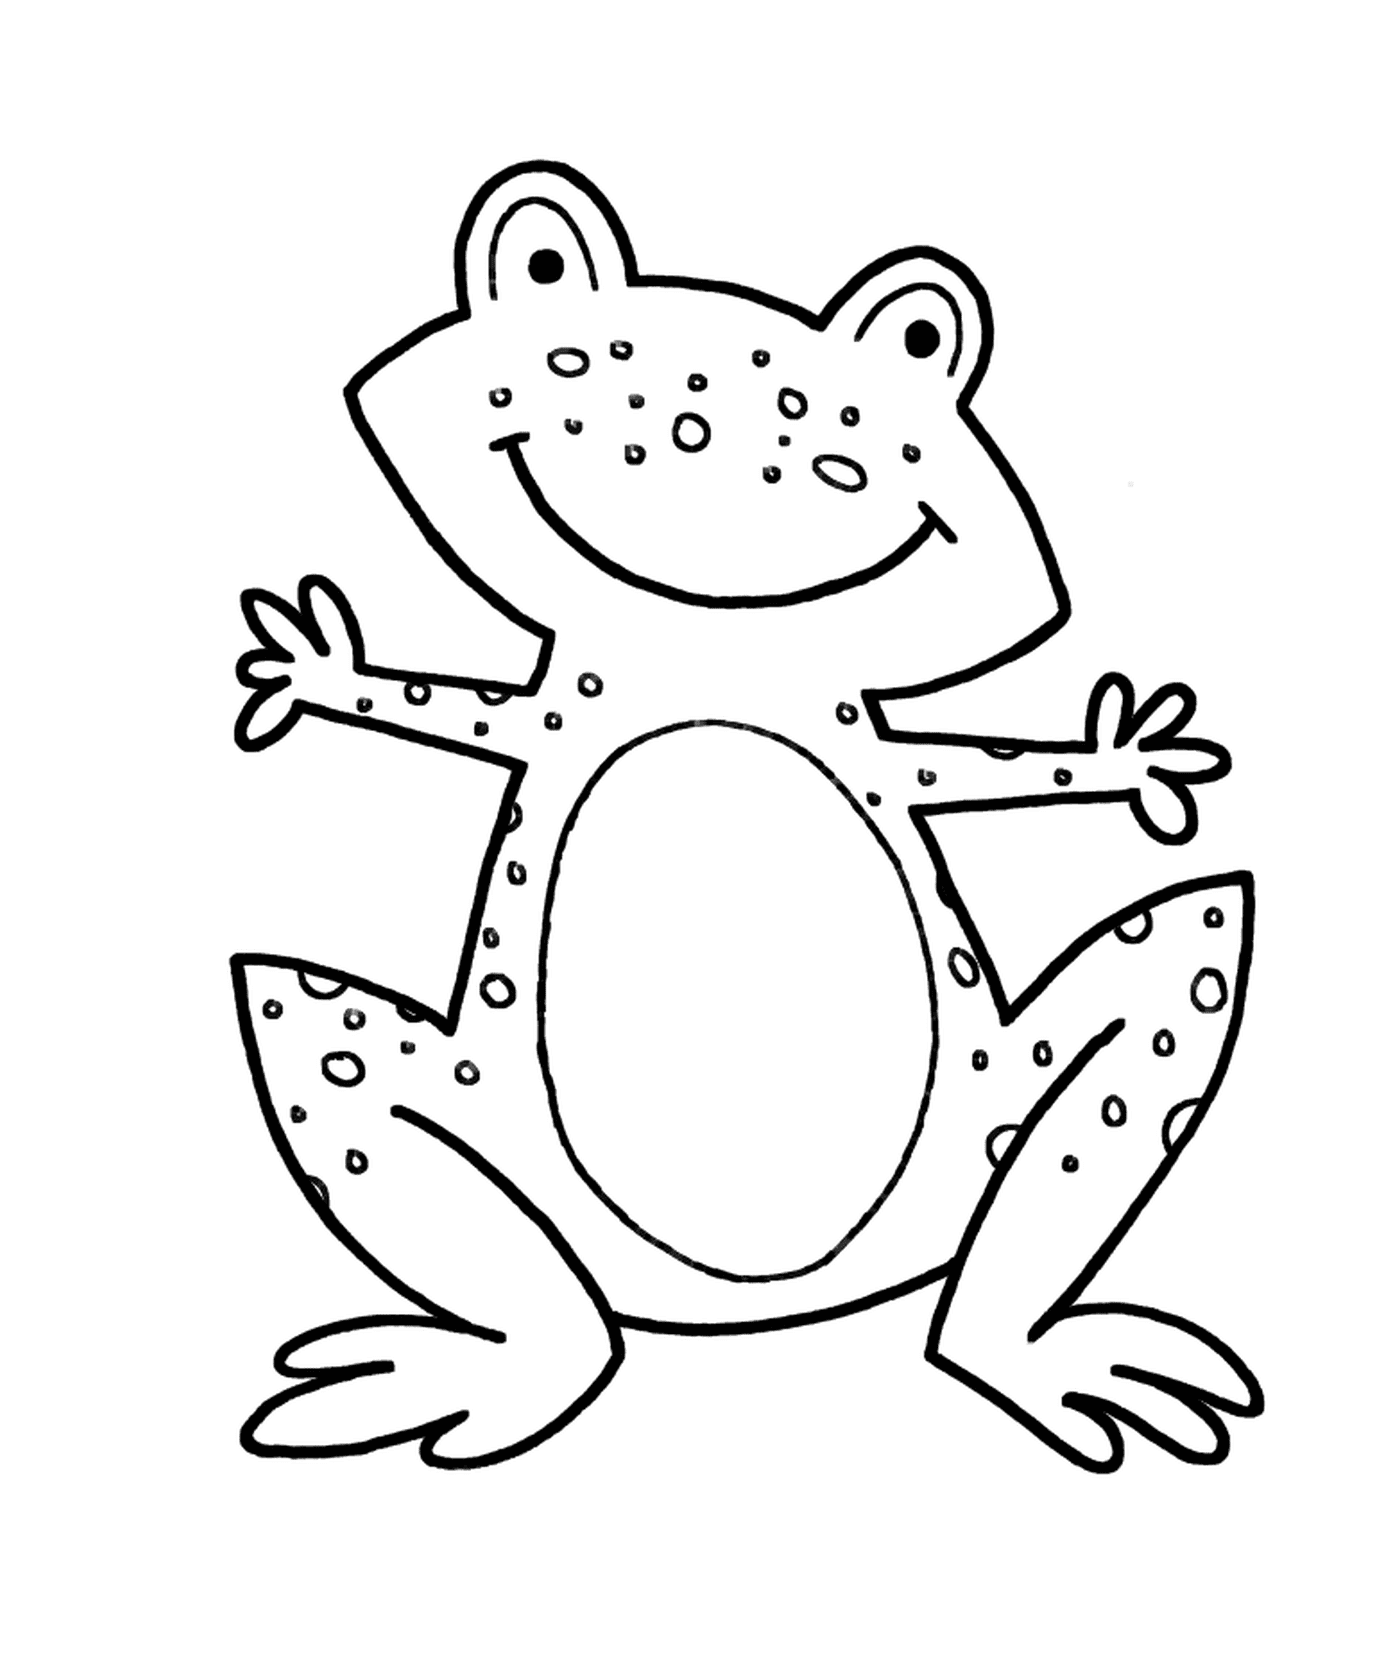  A frog 